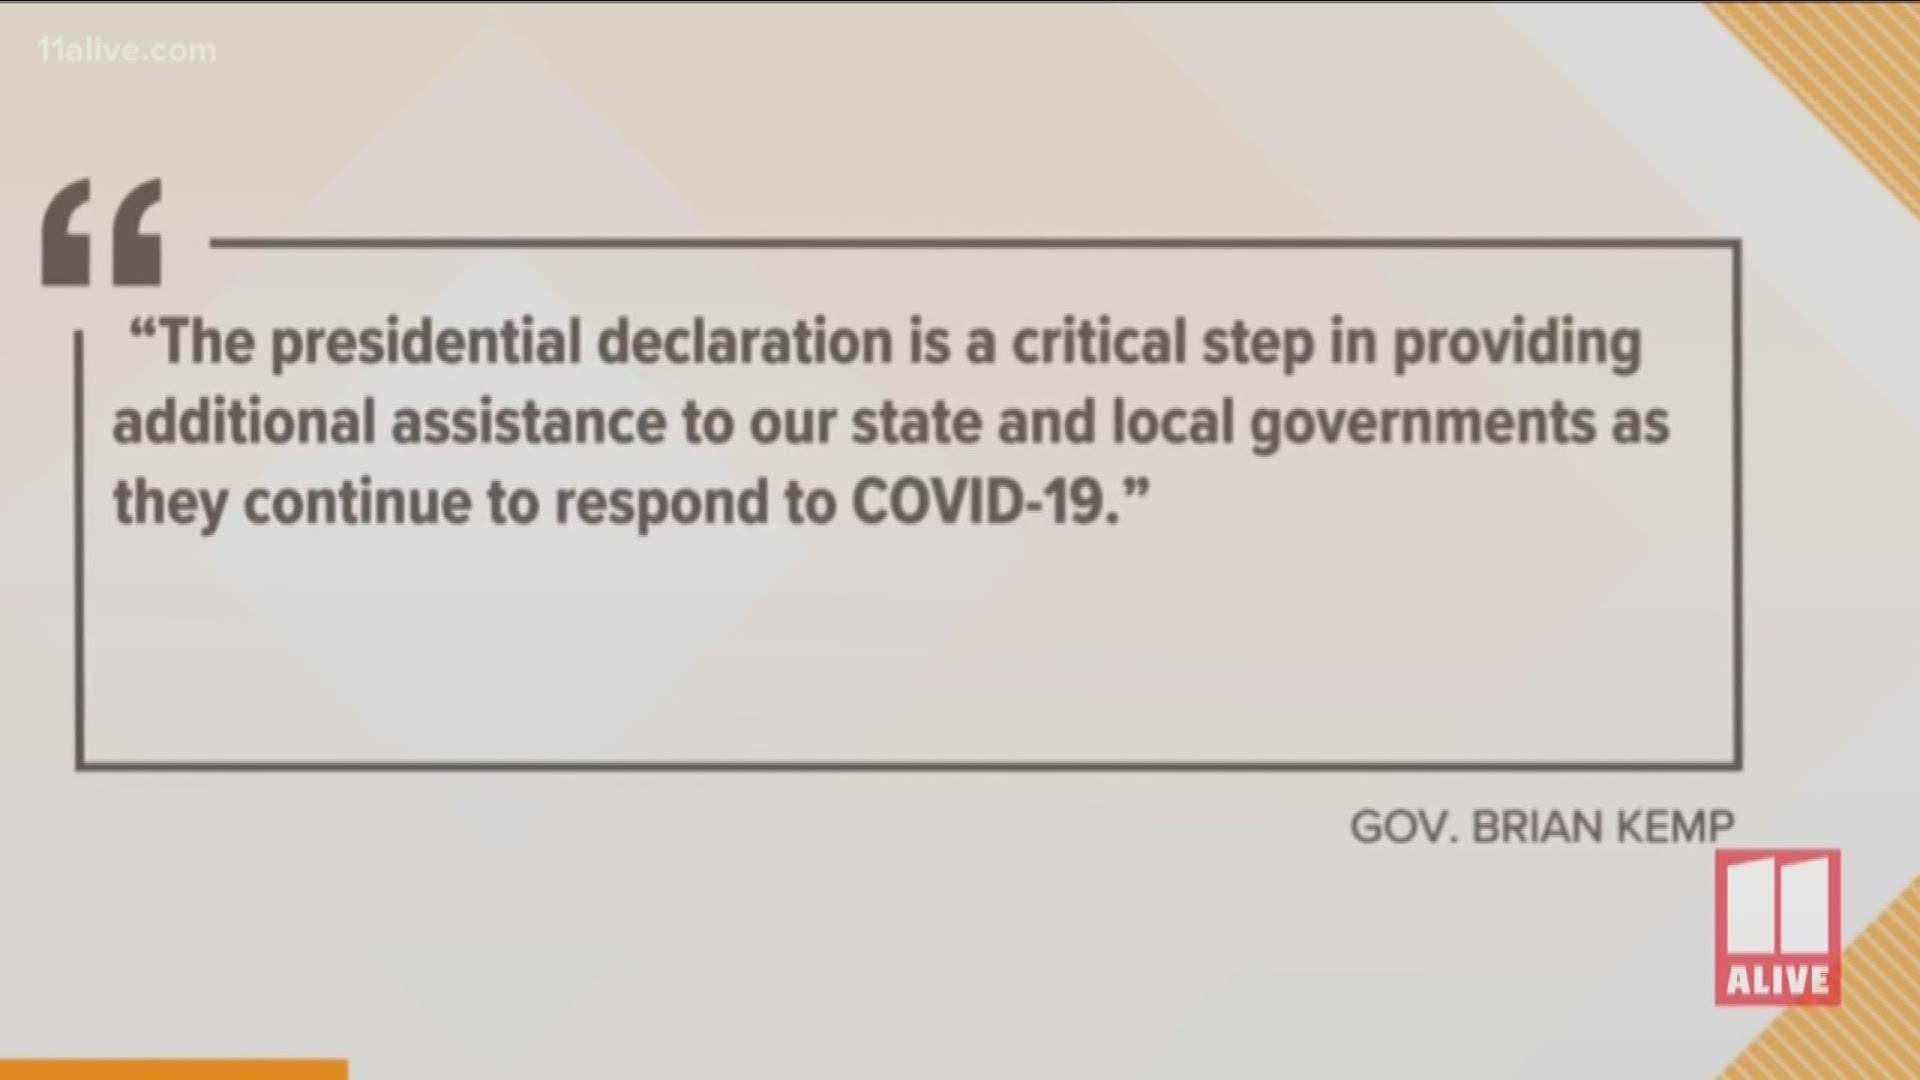 The approval by President Trump authorizes federal aid to be provided directly to the state to assist in the fight against COVID-19.